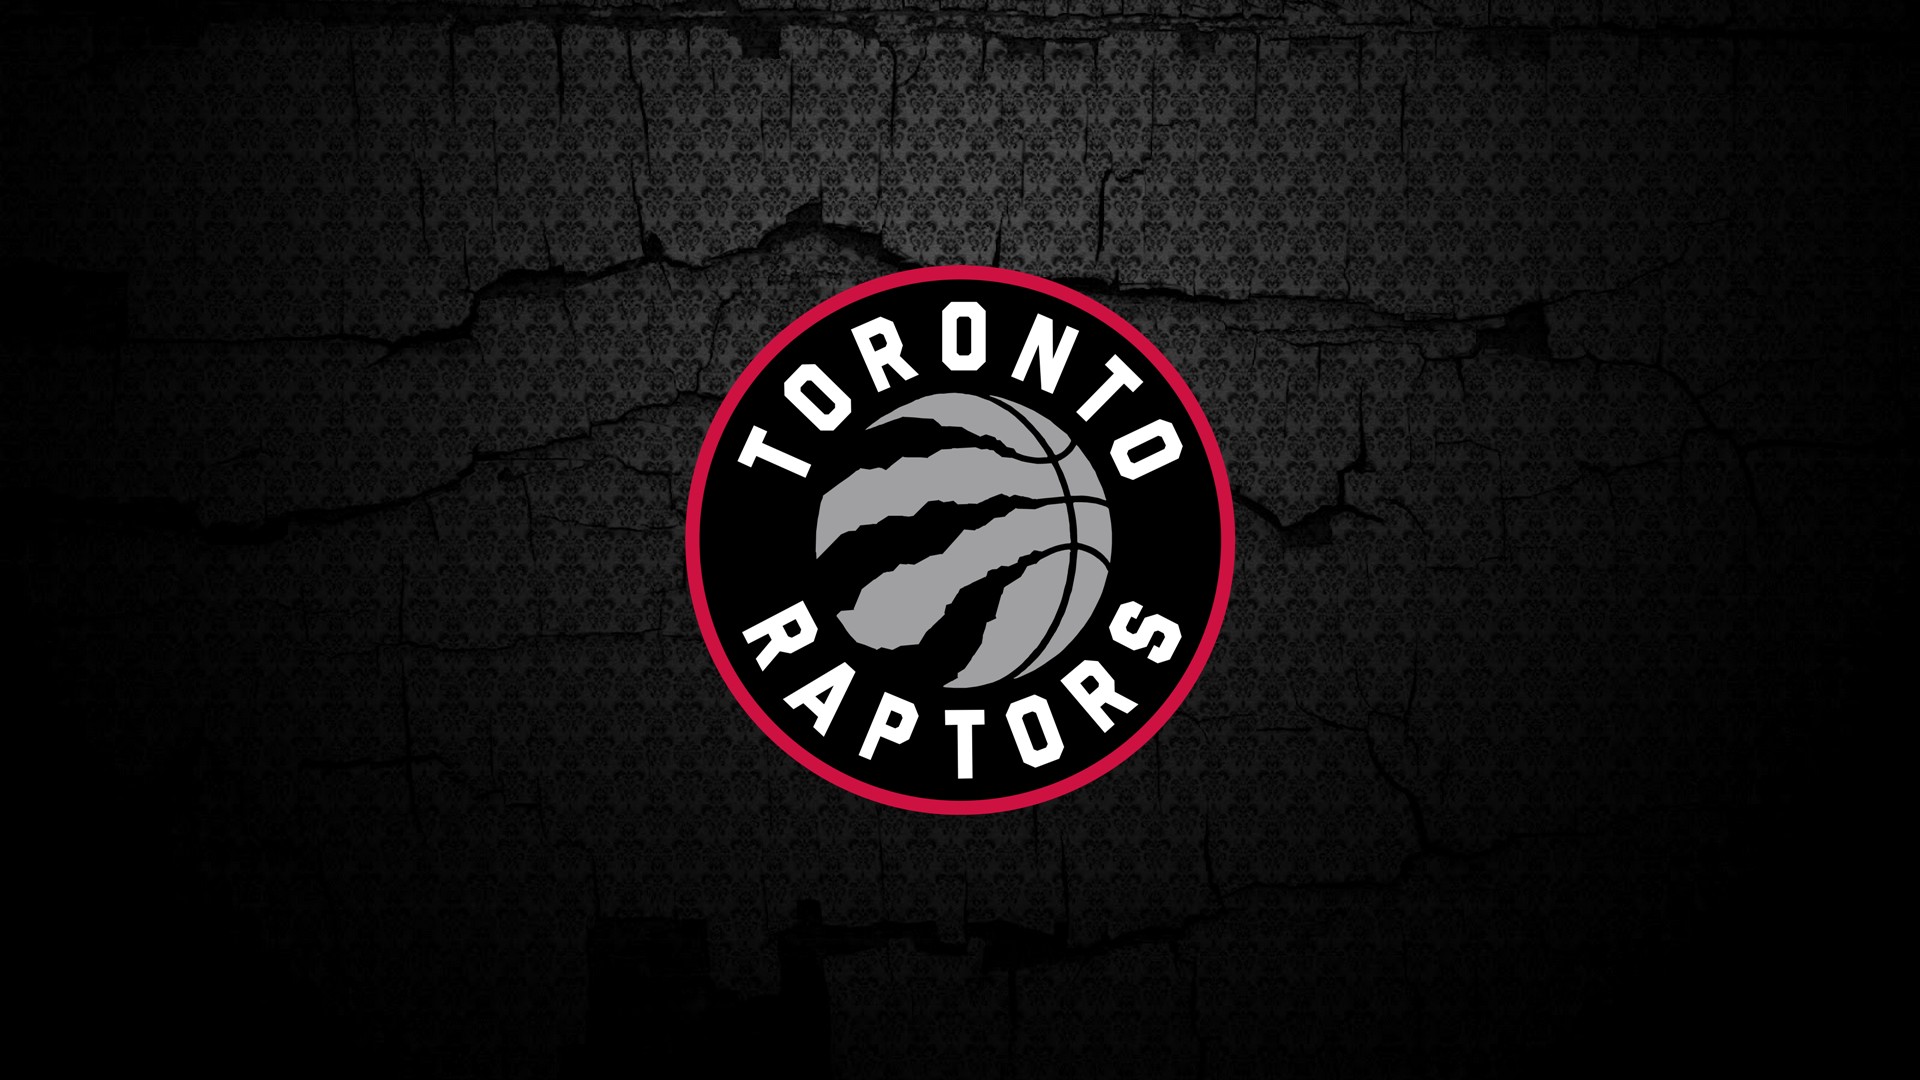 Toronto Raptors Desktop Backgrounds with image resolution 1920x1080 pixel. You can make this wallpaper for your Desktop Computer Backgrounds, Mac Wallpapers, Android Lock screen or iPhone Screensavers